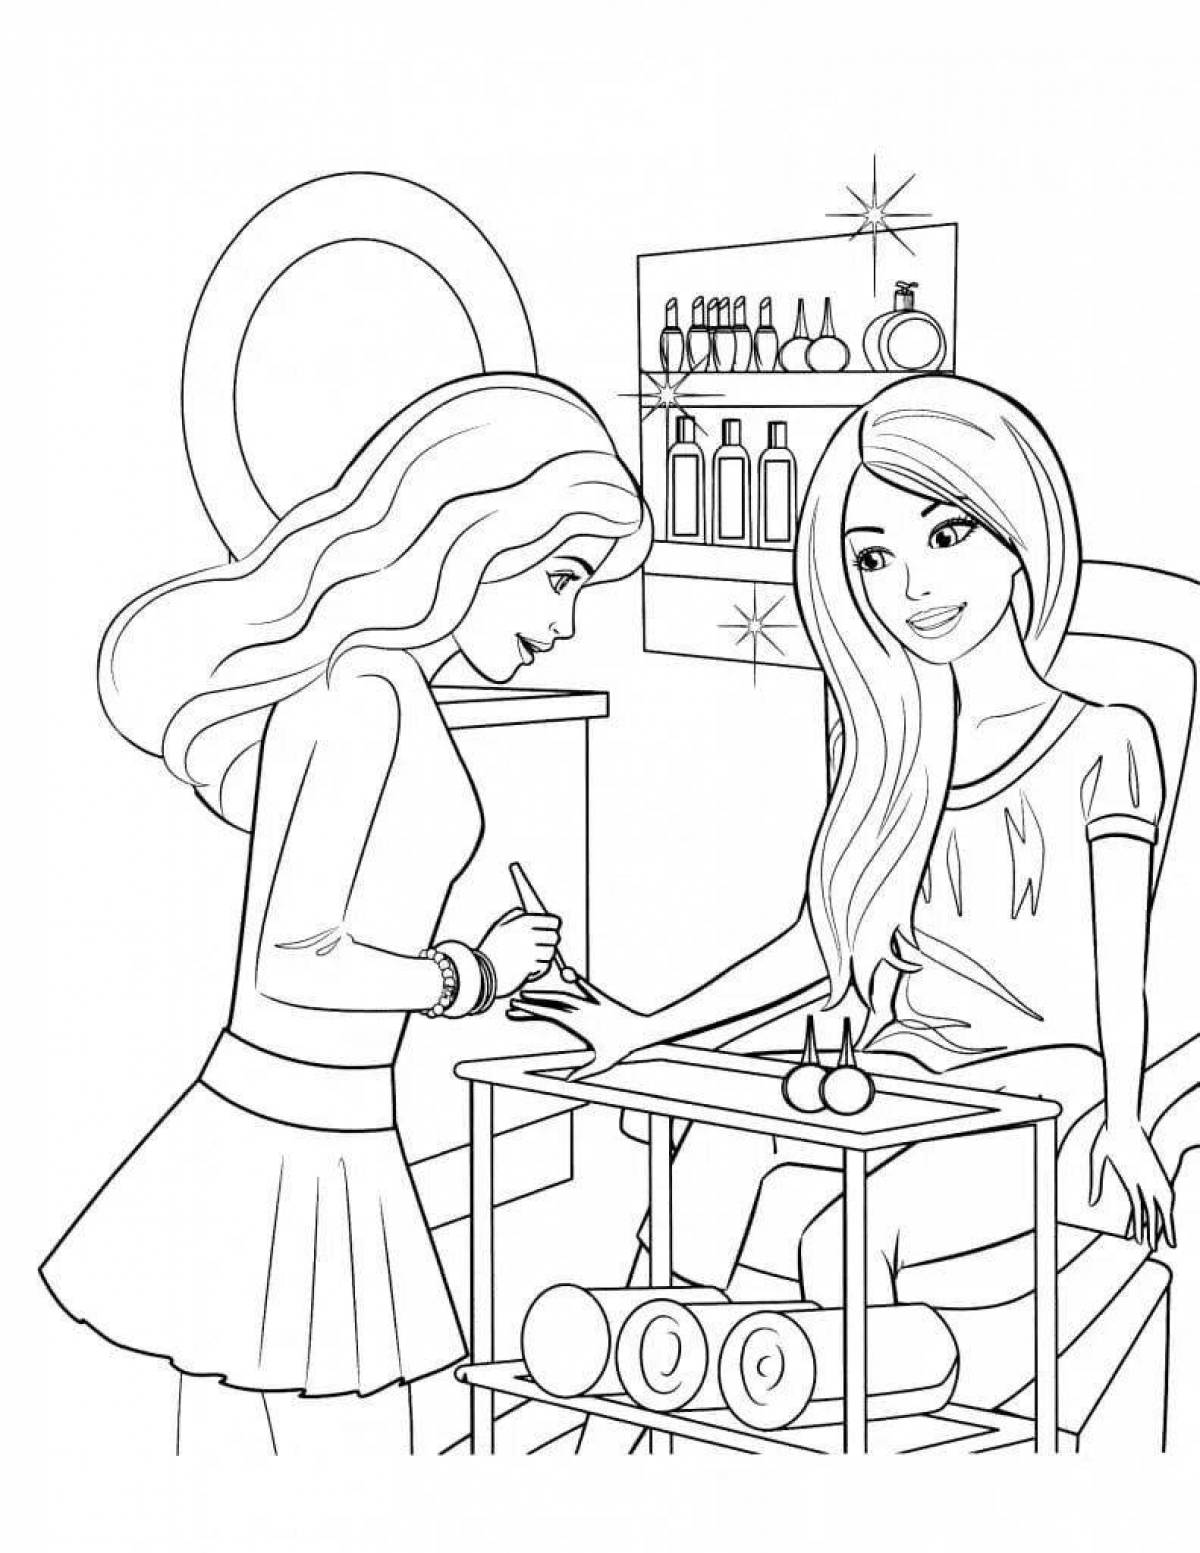 Coloring shop for cute girls